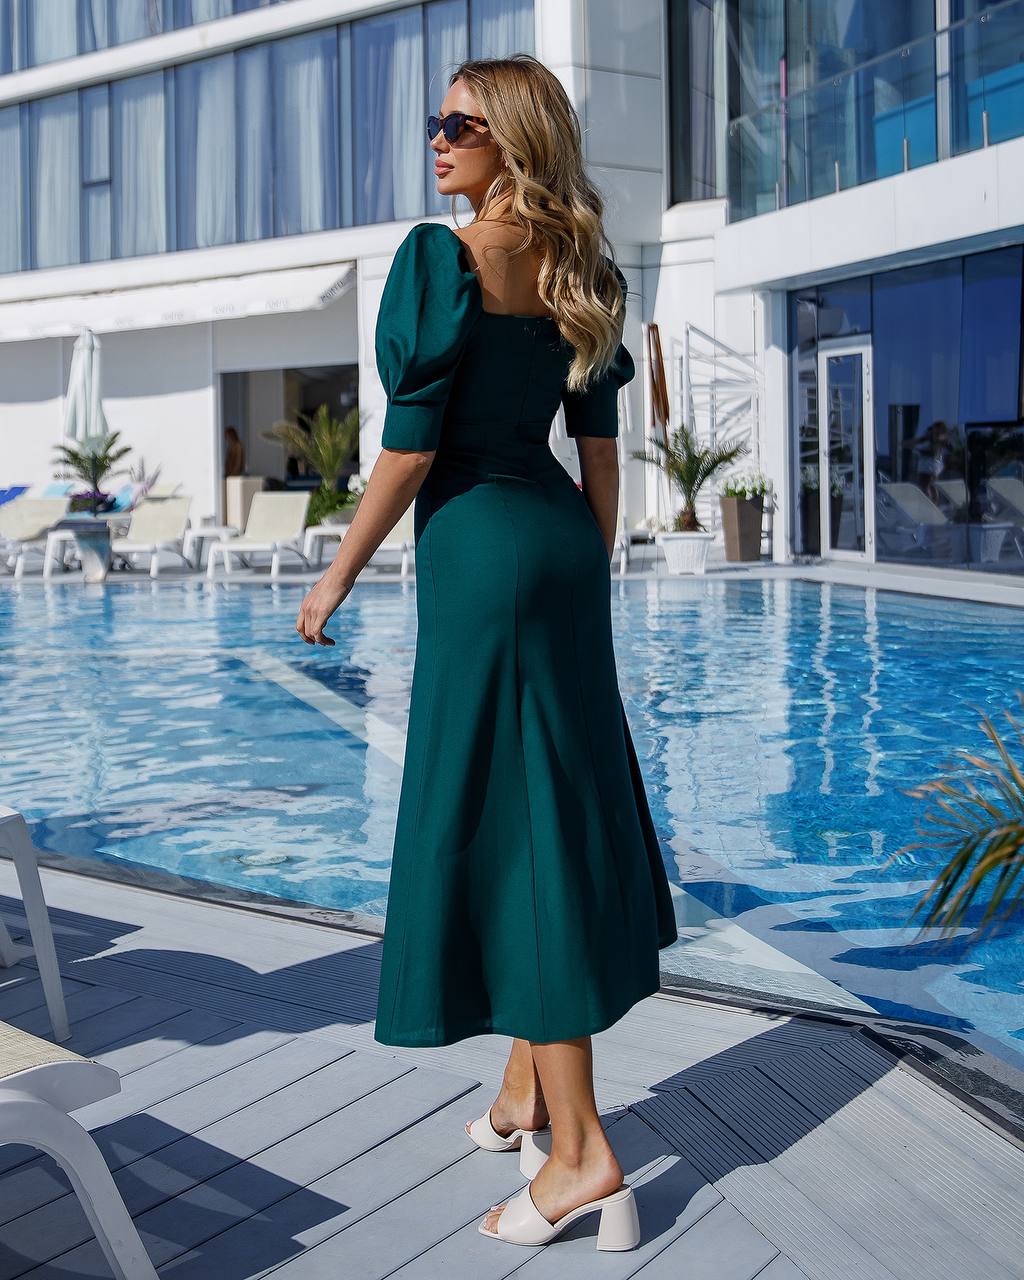 a woman in a green dress standing by a pool